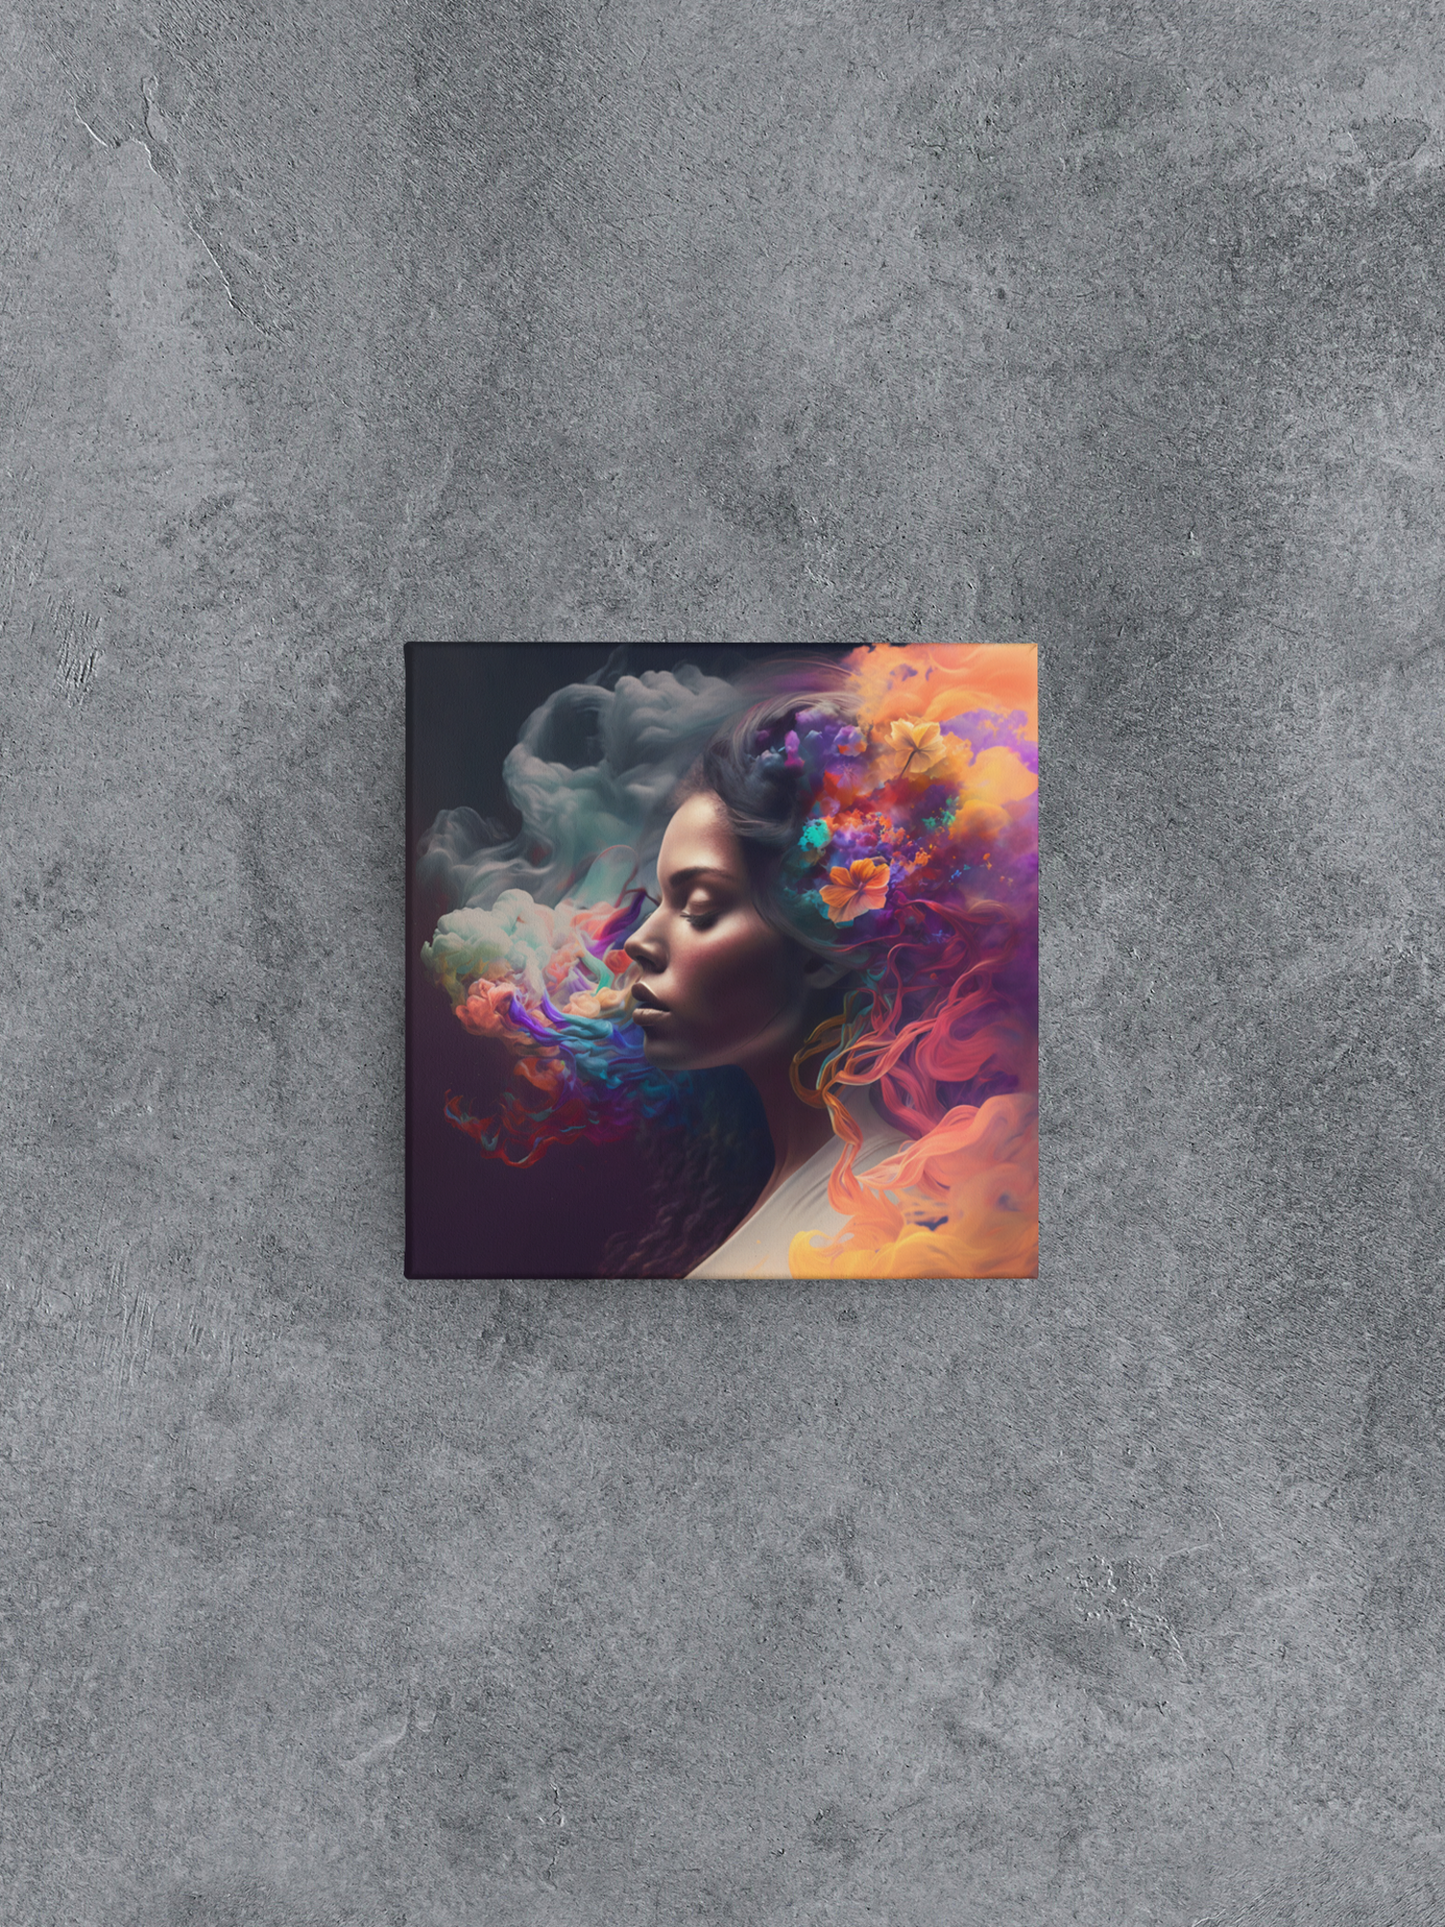 Beauty of the Feminine Form Canvas Wall Art, Woman with Flowers in Her Hair with Vibrant, Billowing Hair Canvas Print